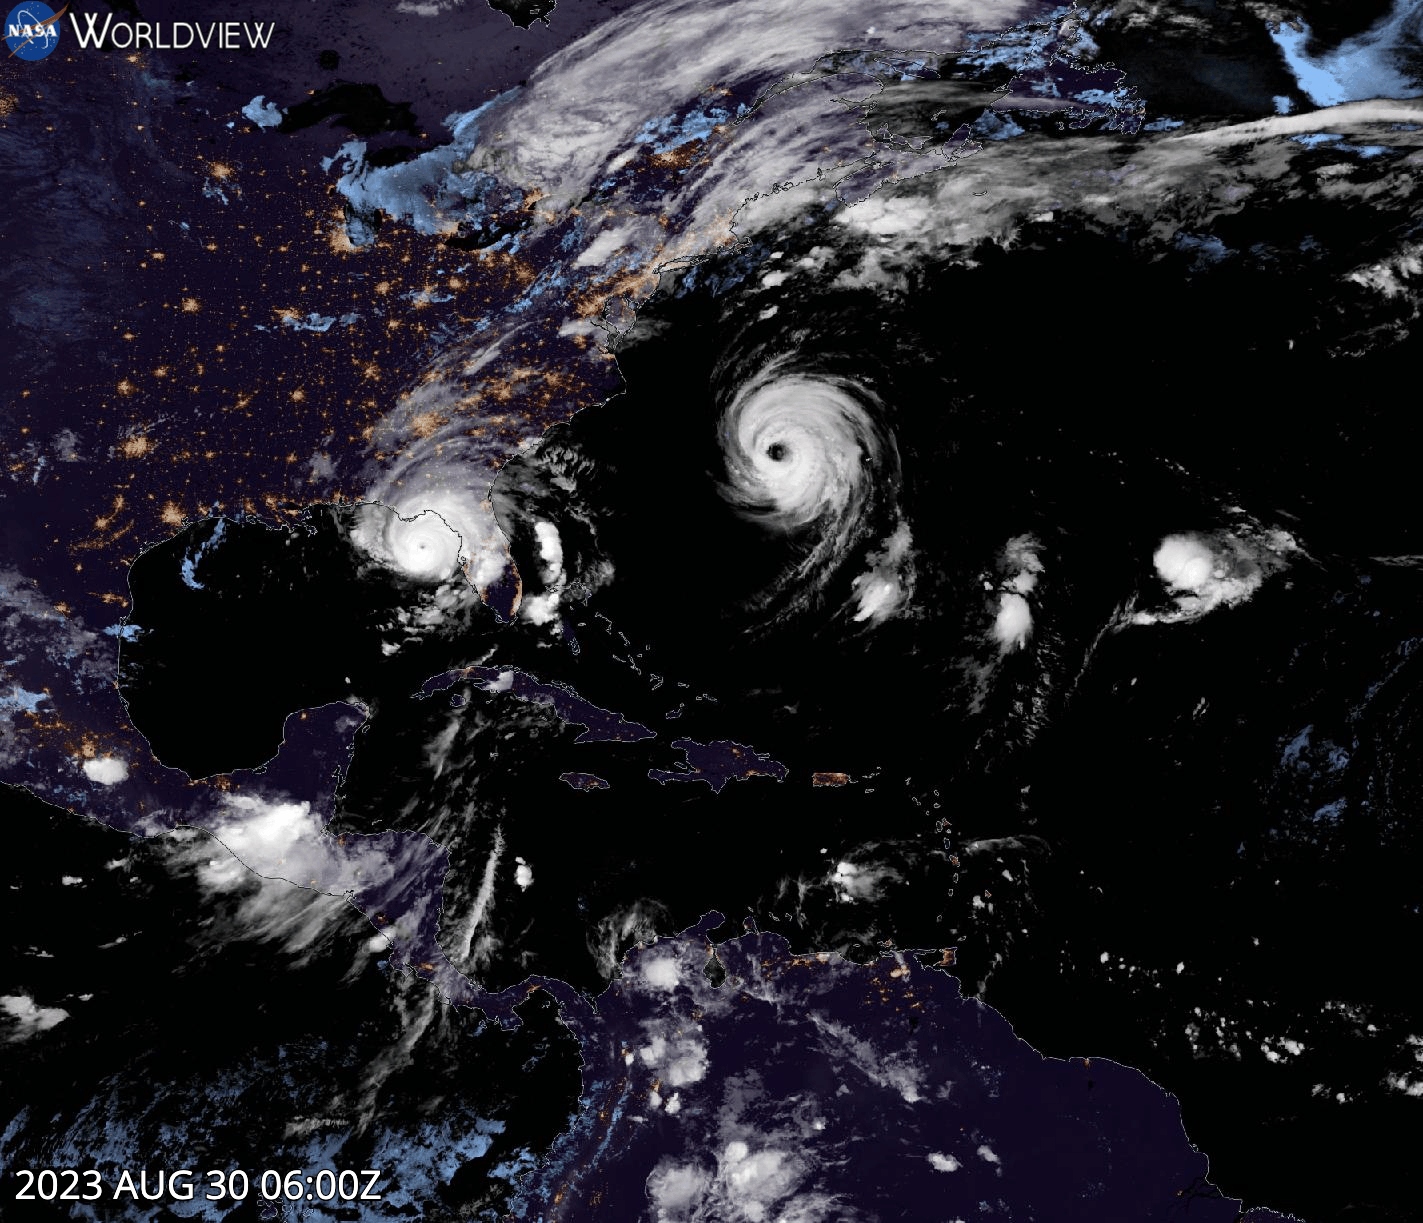 GeoColor image of Hurricane Idalia and Hurricane Franklin on Aug 30 6:00 to Aug 31 4:00 UTC from the ABI instrument on the GOES-East satellite.